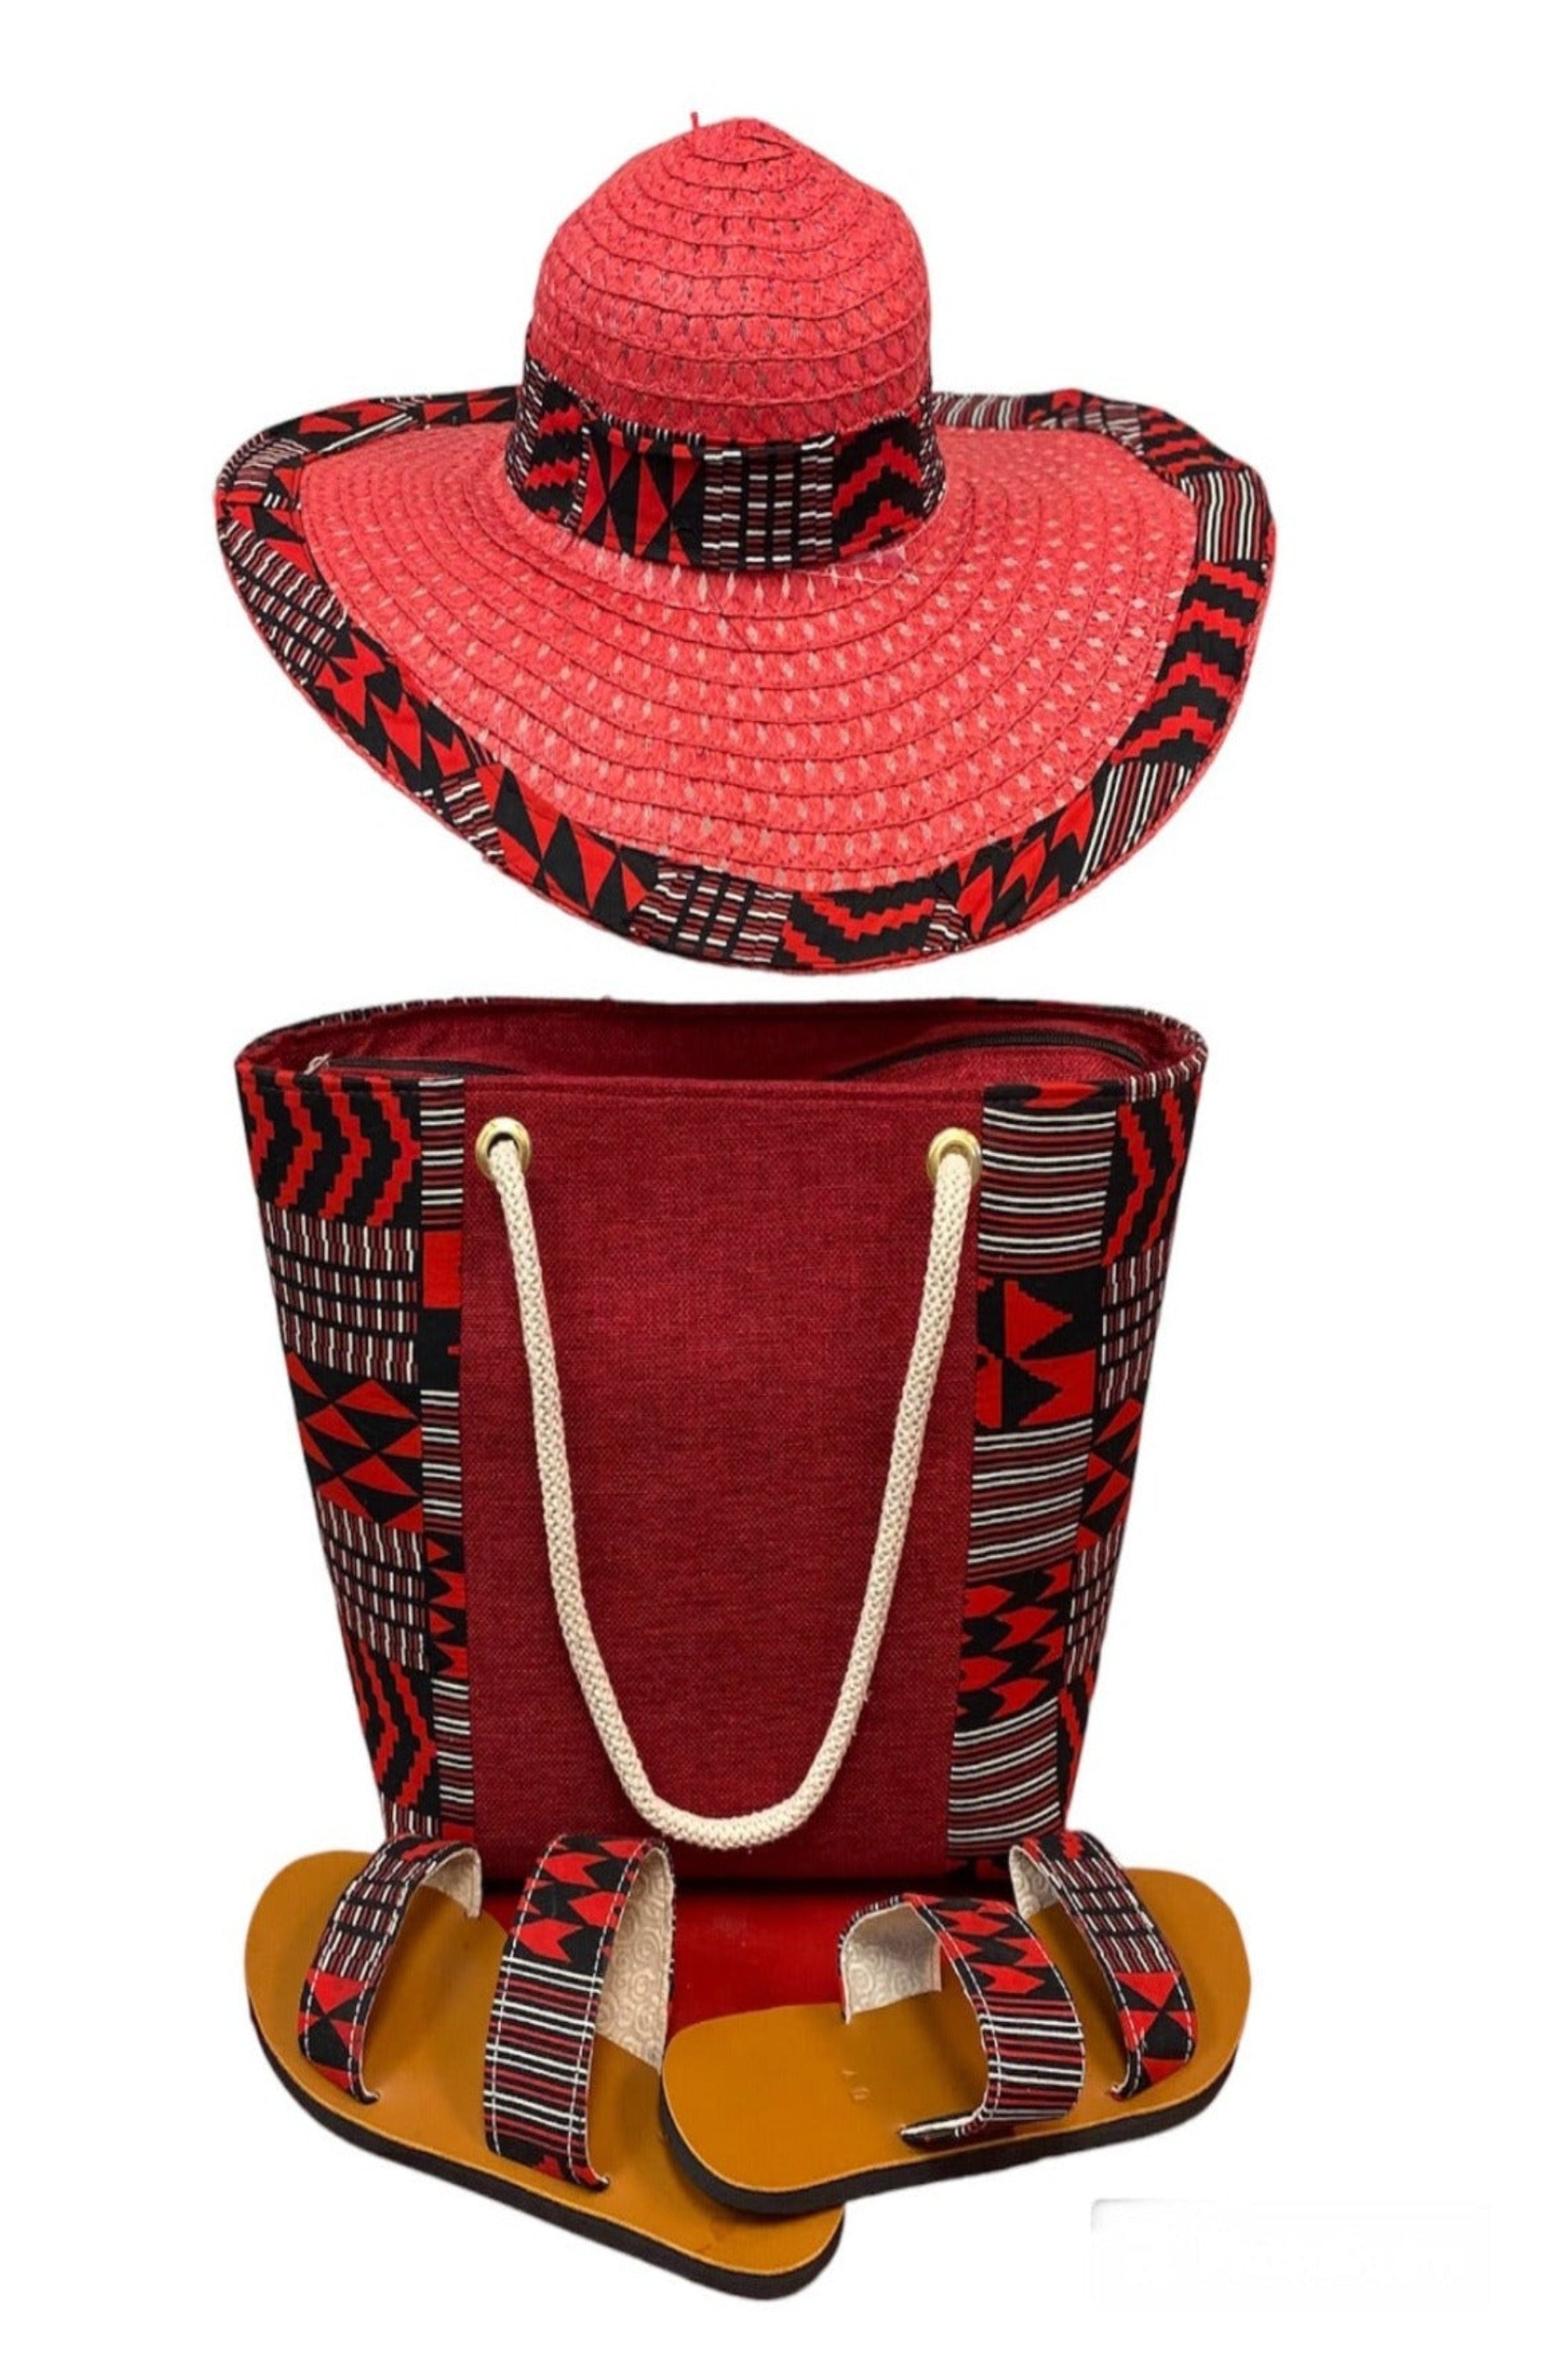 African Textile Bag with matching accessories African print Handbag, (bag 15"w x 12" h. Sandal size 39)